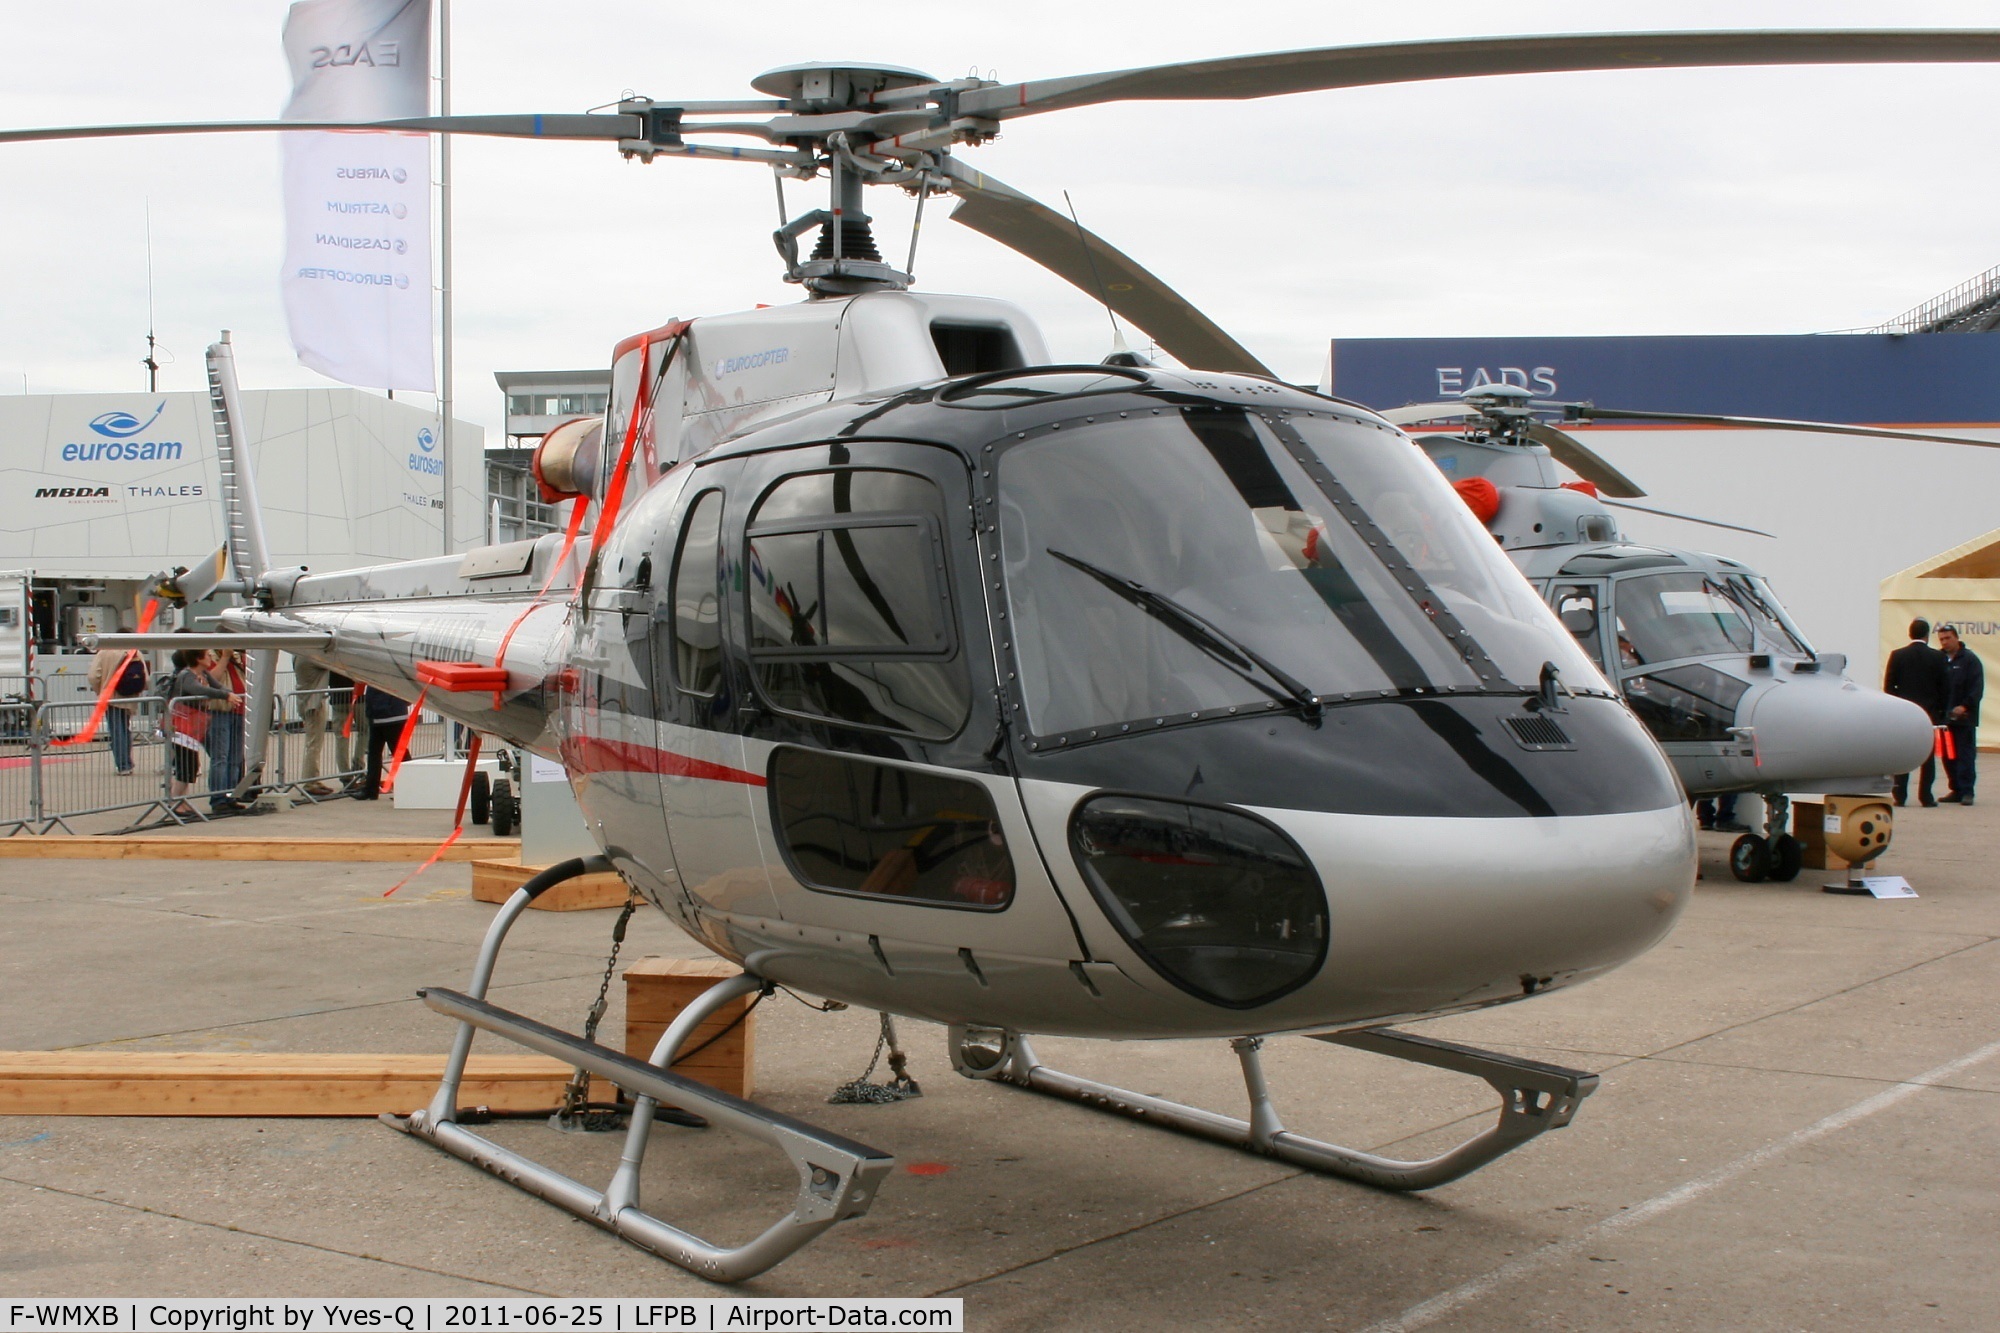 F-WMXB, Airbus Helicopter H175M C/N 5001, Eurocopter AS-350B-3E Ecureuil, Static Display, Paris Le Bourget (LFPB-LBG) Air Show 2011